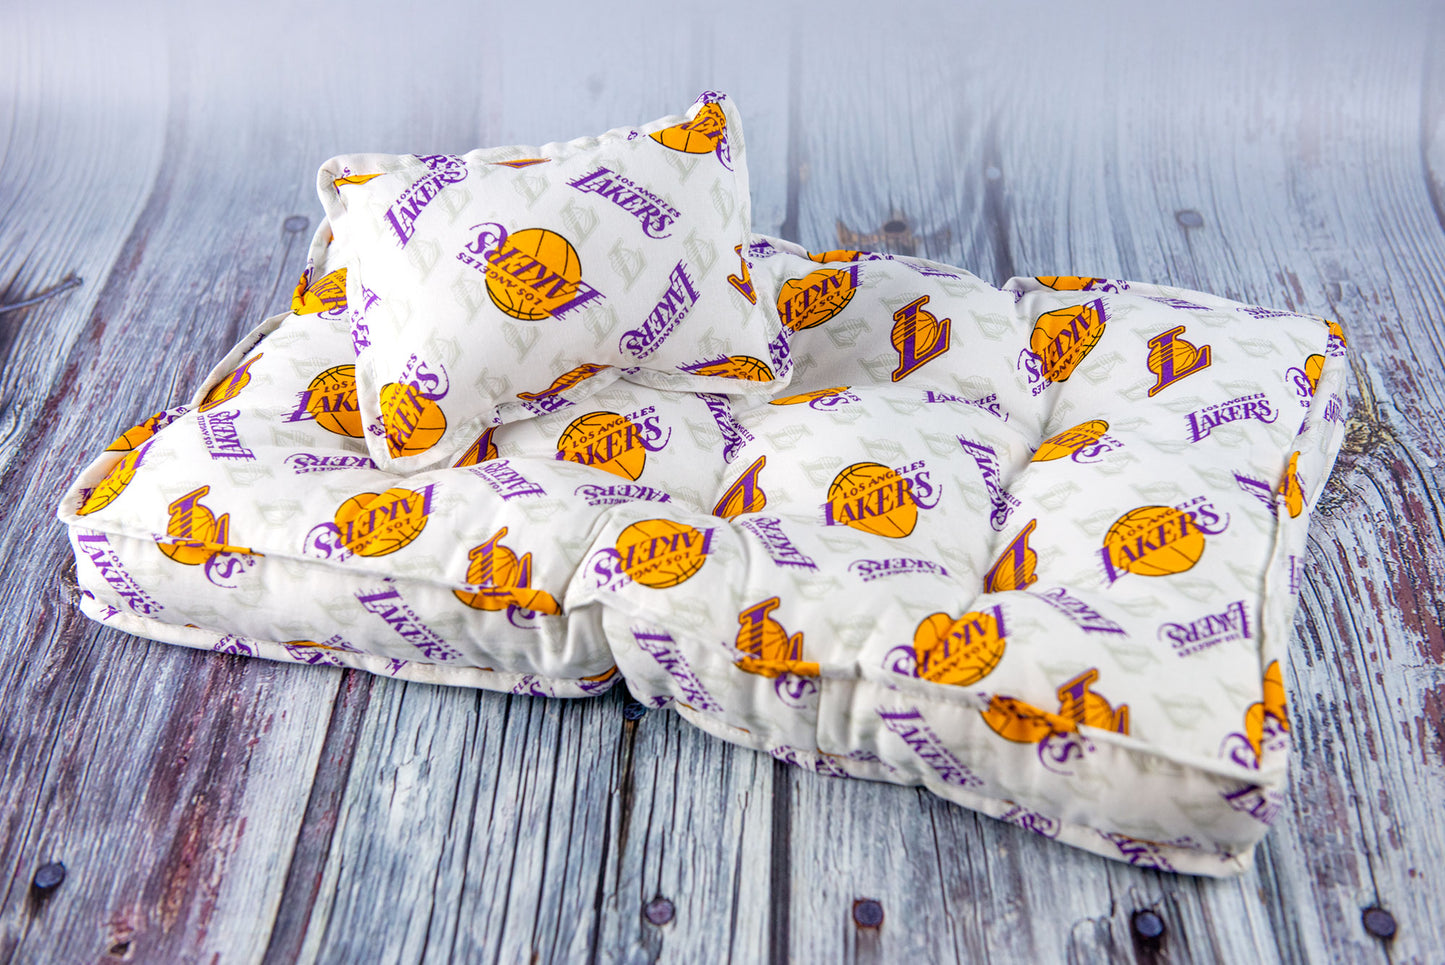 SET Mattress and Pillow - Los Angeles Lakers